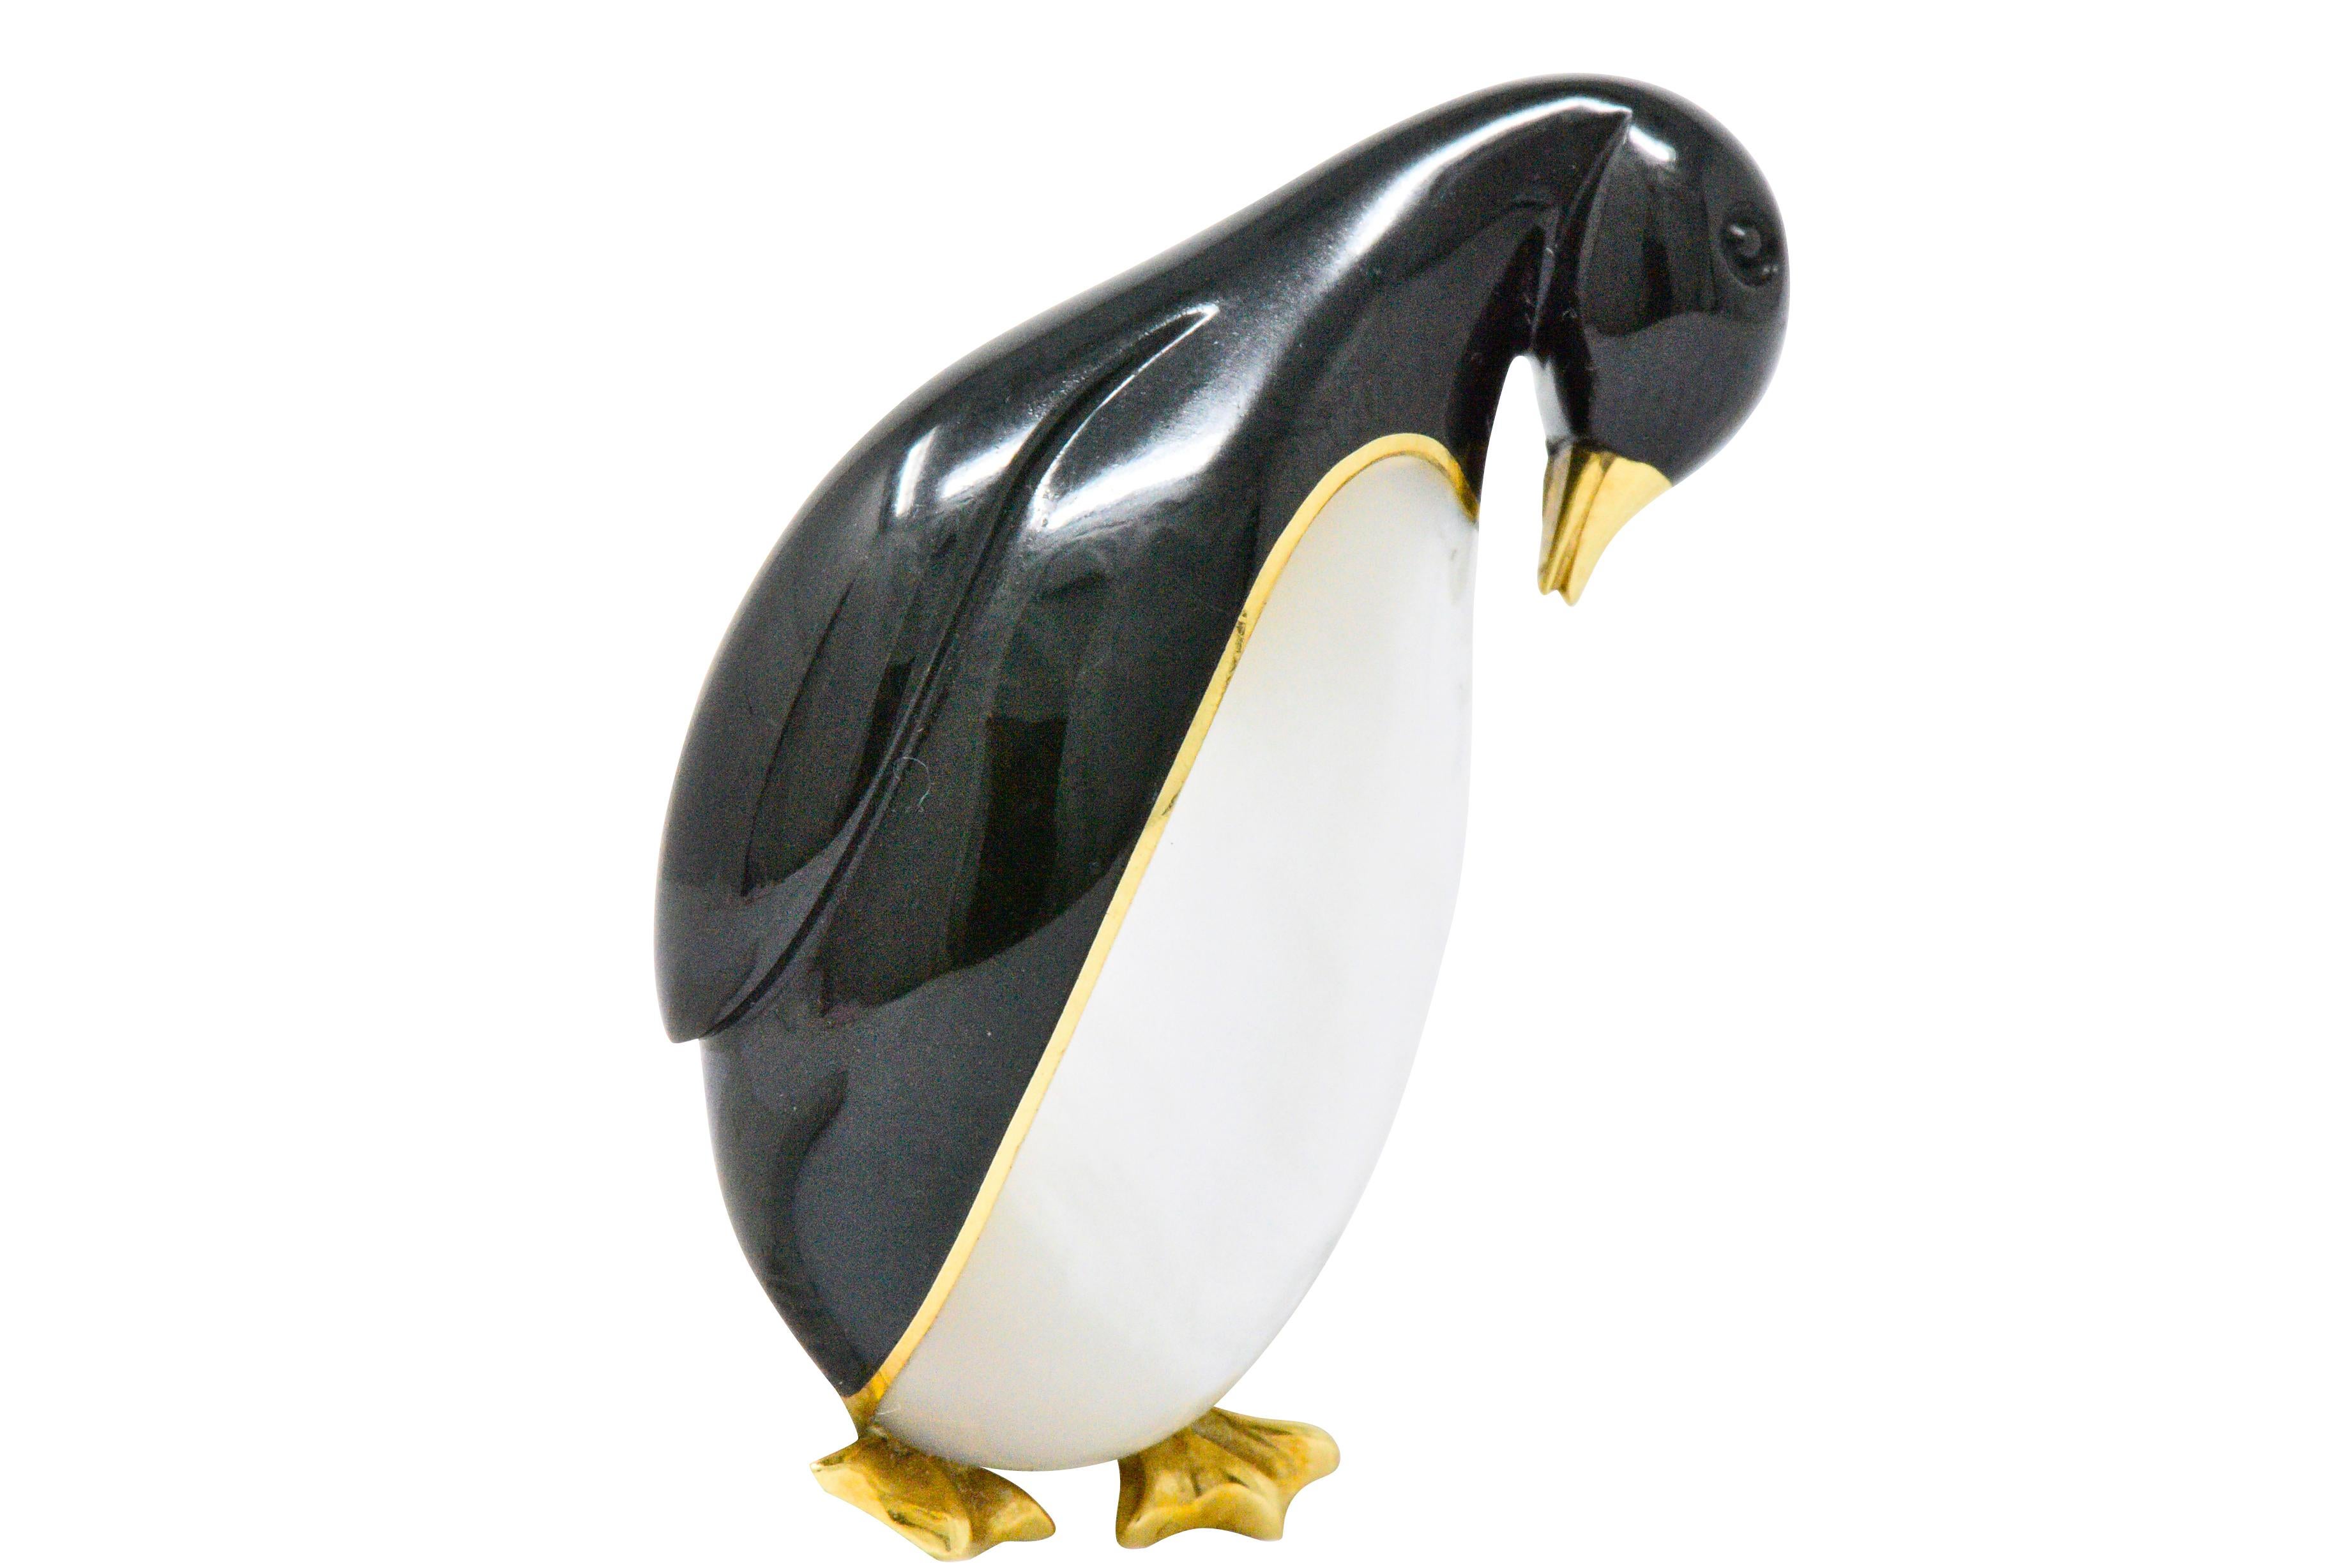 Designed as an emperor penguin with carved black jade and mother-of-pearl body
Polished gold webbed feet, beak and detailing
Fully signed Tiffany & Co.
Circa 1970
Measuring: 1 5/8 x 3/4 inches
Total Weight: 13.8 Grams
Adorable. Whimsical. Cute. 
 

